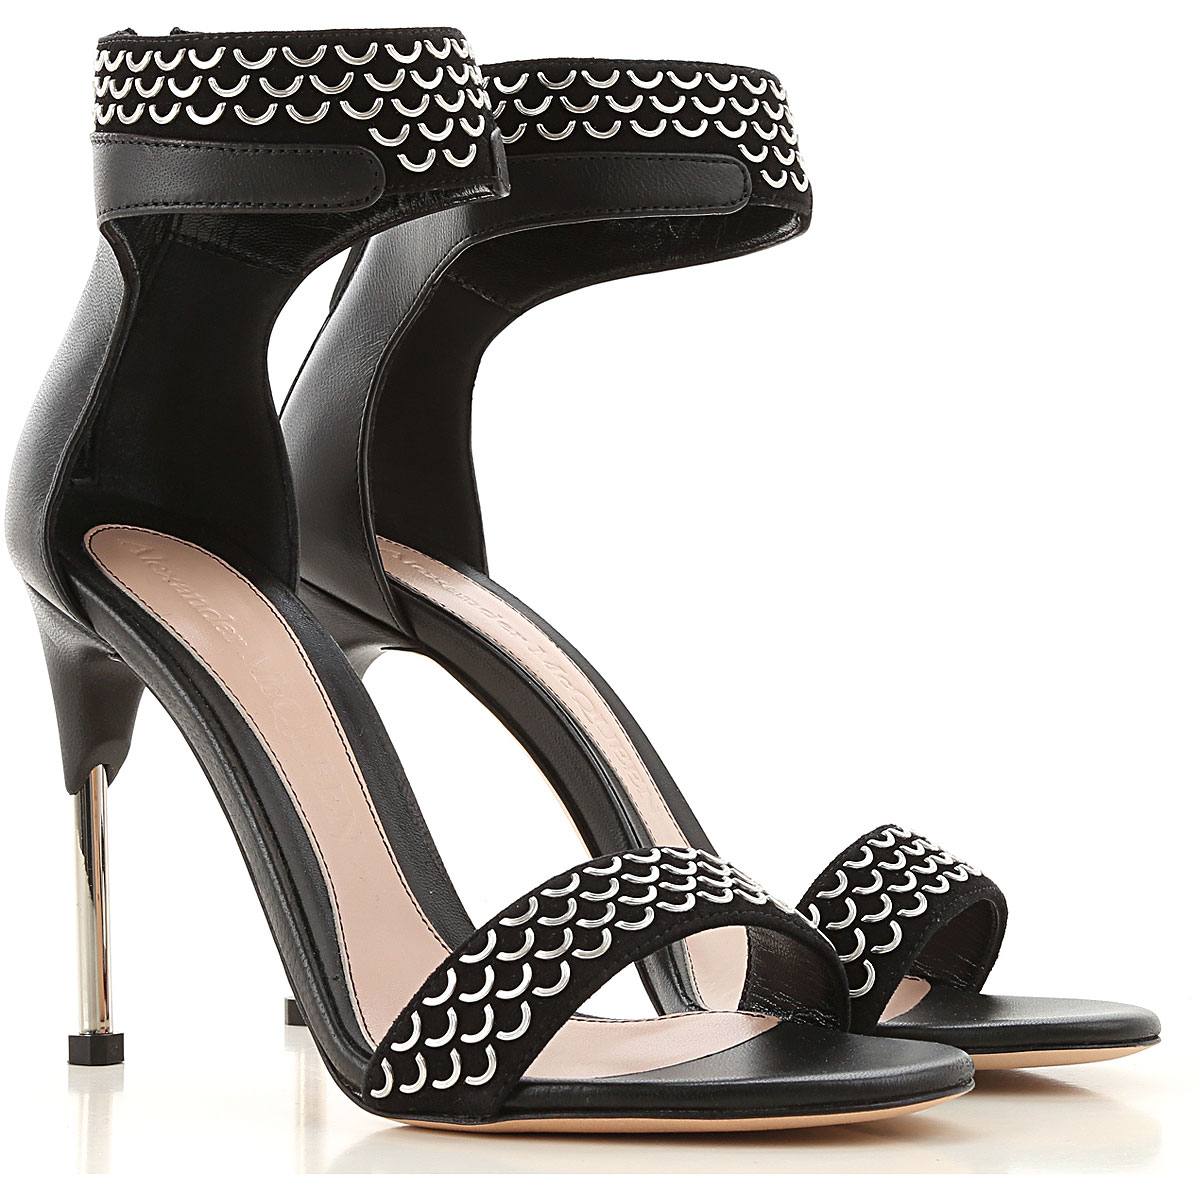 Womens Shoes Alexander McQueen, Style code: 559907-whs4w-1081